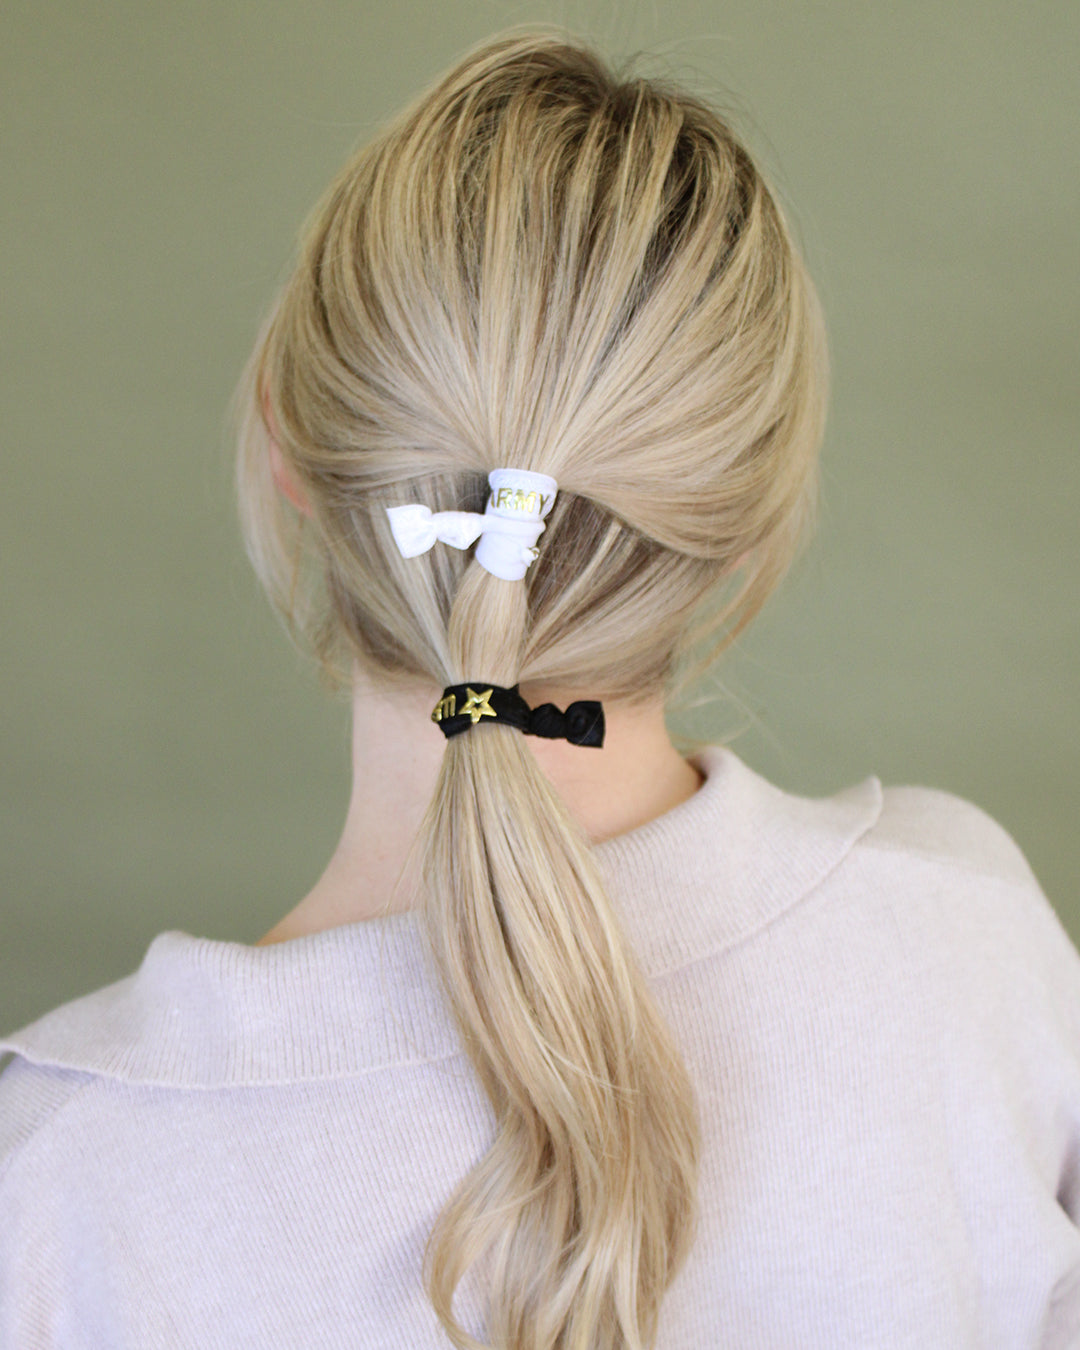 Be All You Can Be. Hair Ties | BANDED Hair Accessories